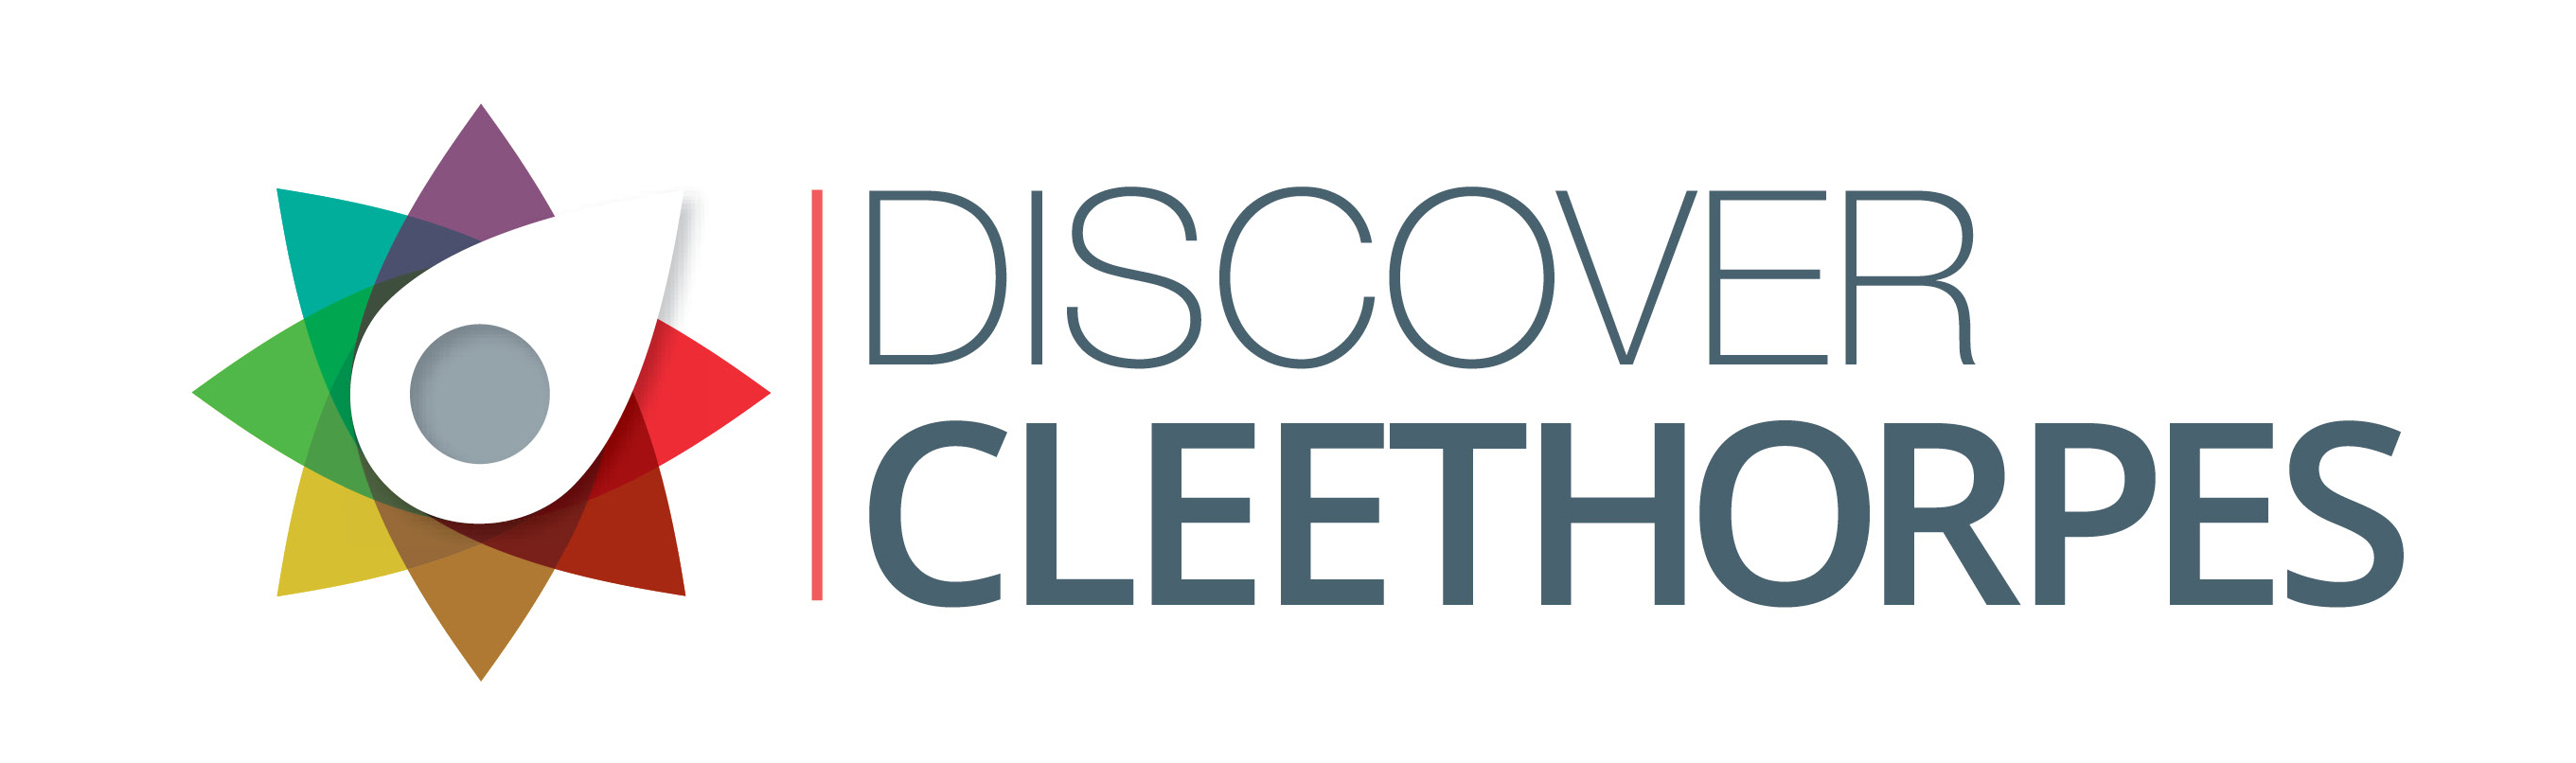 DiscoverNEL Cleethorpes